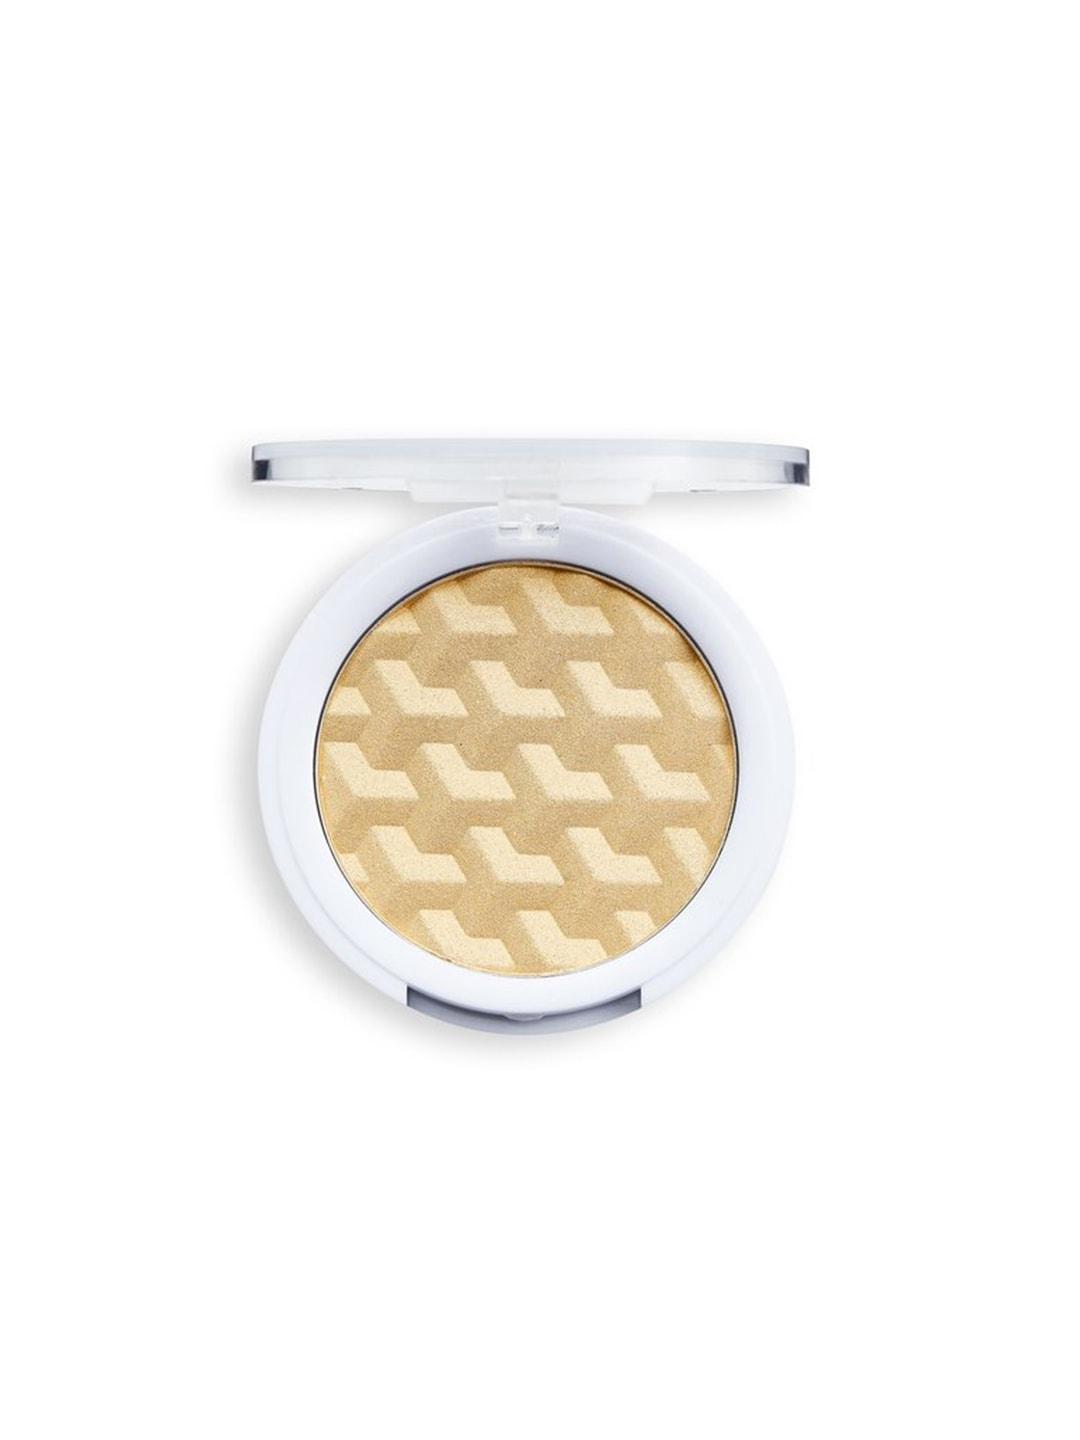 relove by revolution super highlight super glow finish highlighter - champagne